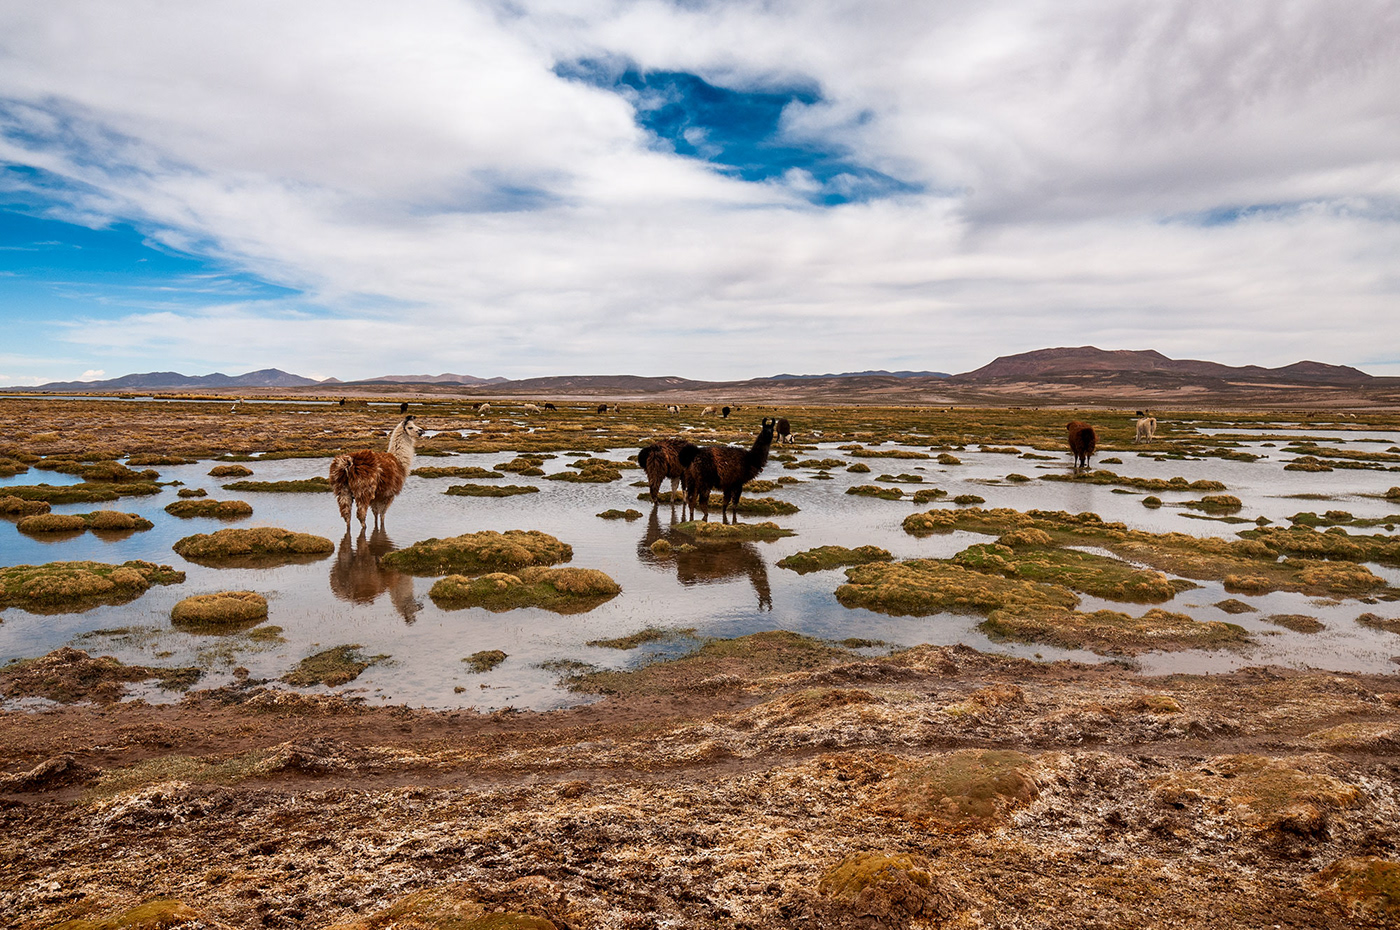 Group of lamas is standing in shallow lake in Bolivia.